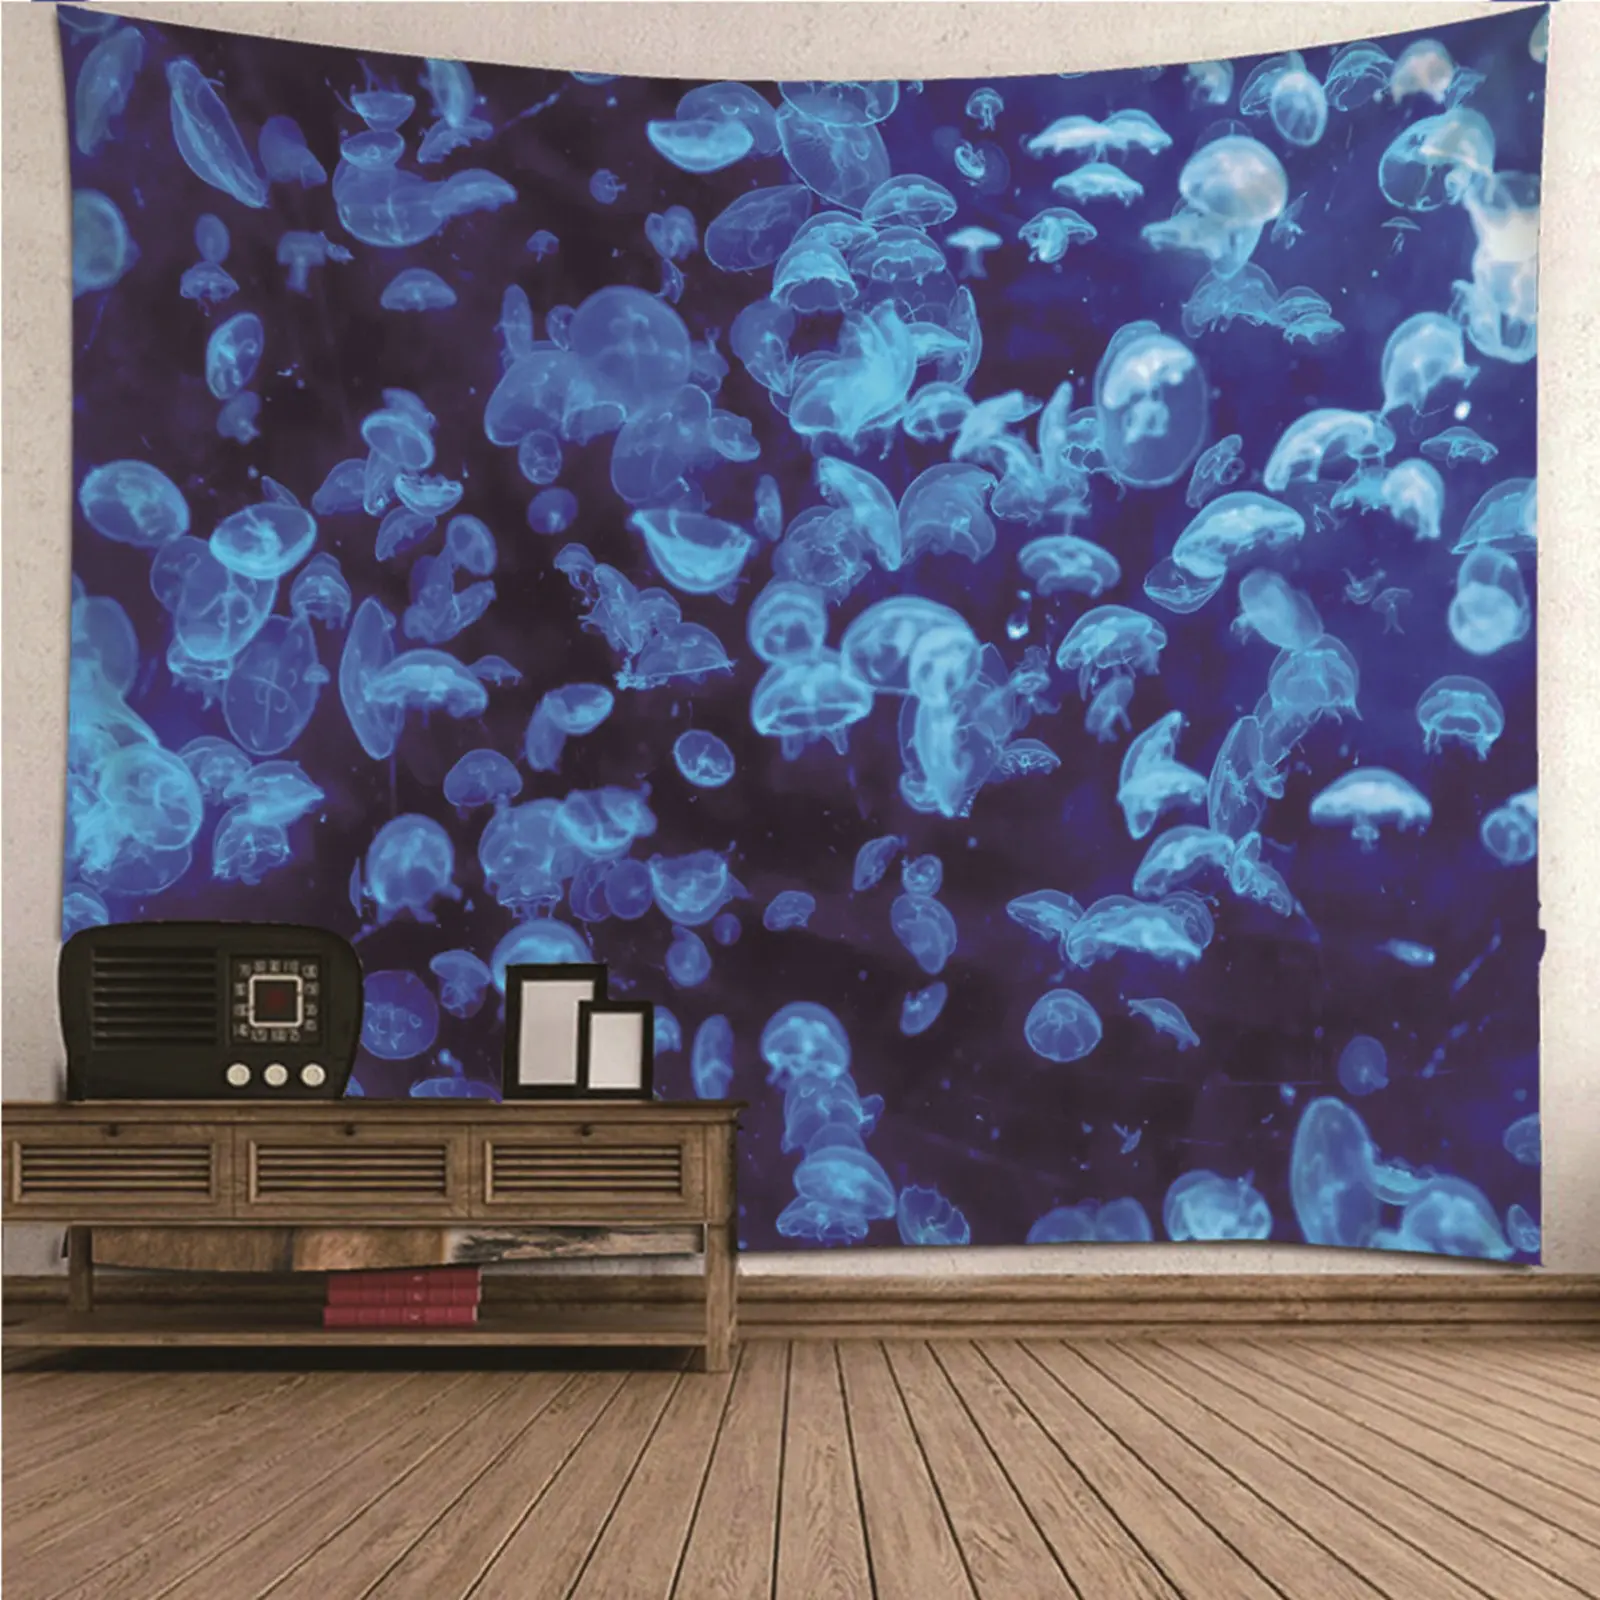 

Cool Tapestry Wall Art Extra Large Jellyfish Wall Hanging Blanket Dorm Art Decor Covering